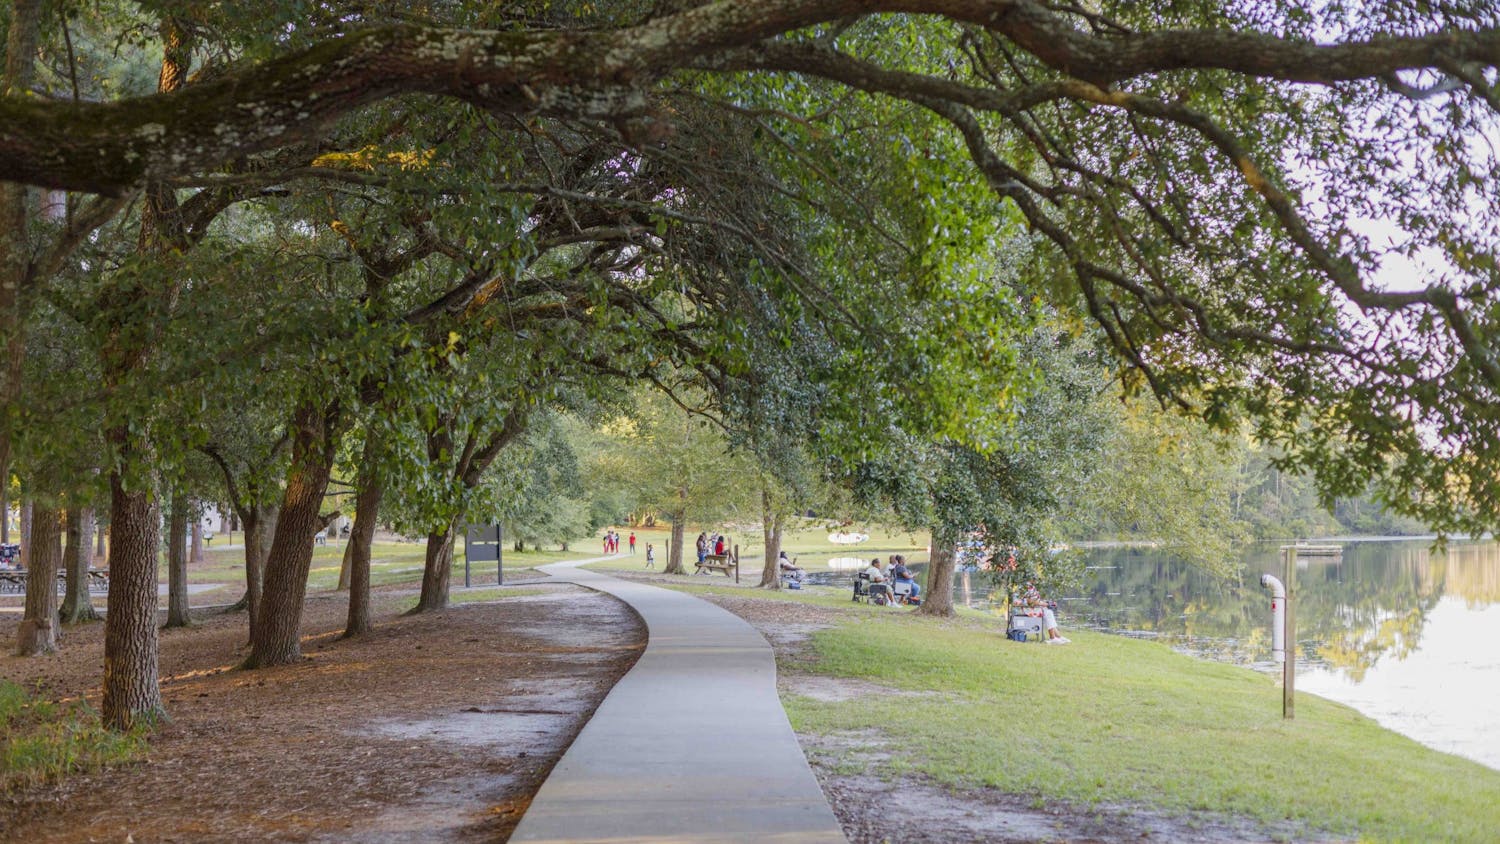 People sit, read, talk and enjoy the South Carolina weather along a paved path through Sesquicentennial State park.&nbsp;